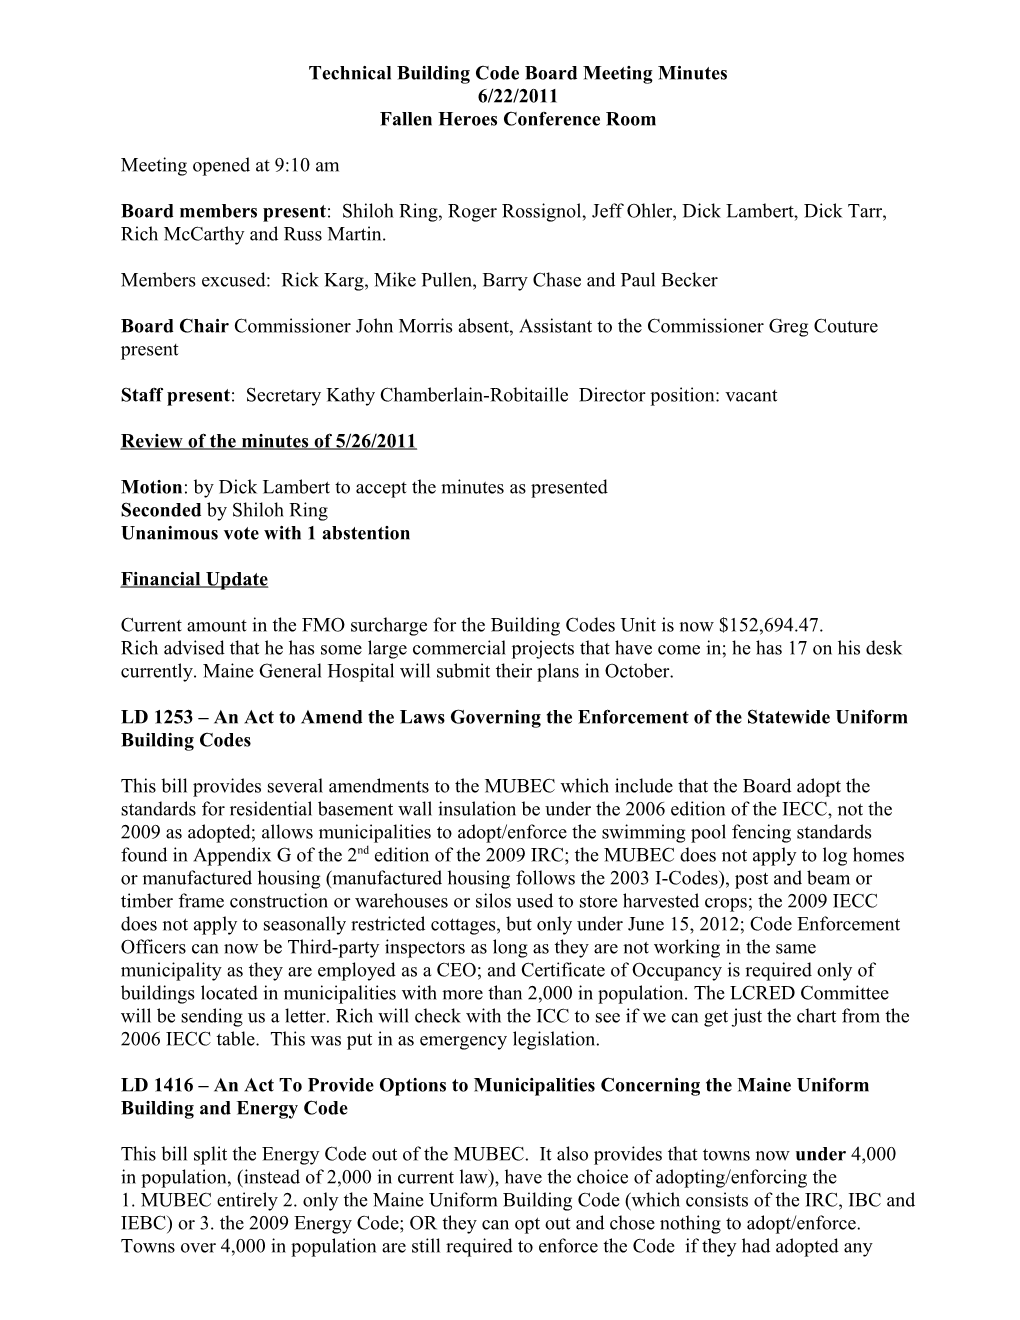 Draft of the Technical Building Code Board Meeting Minutes s1